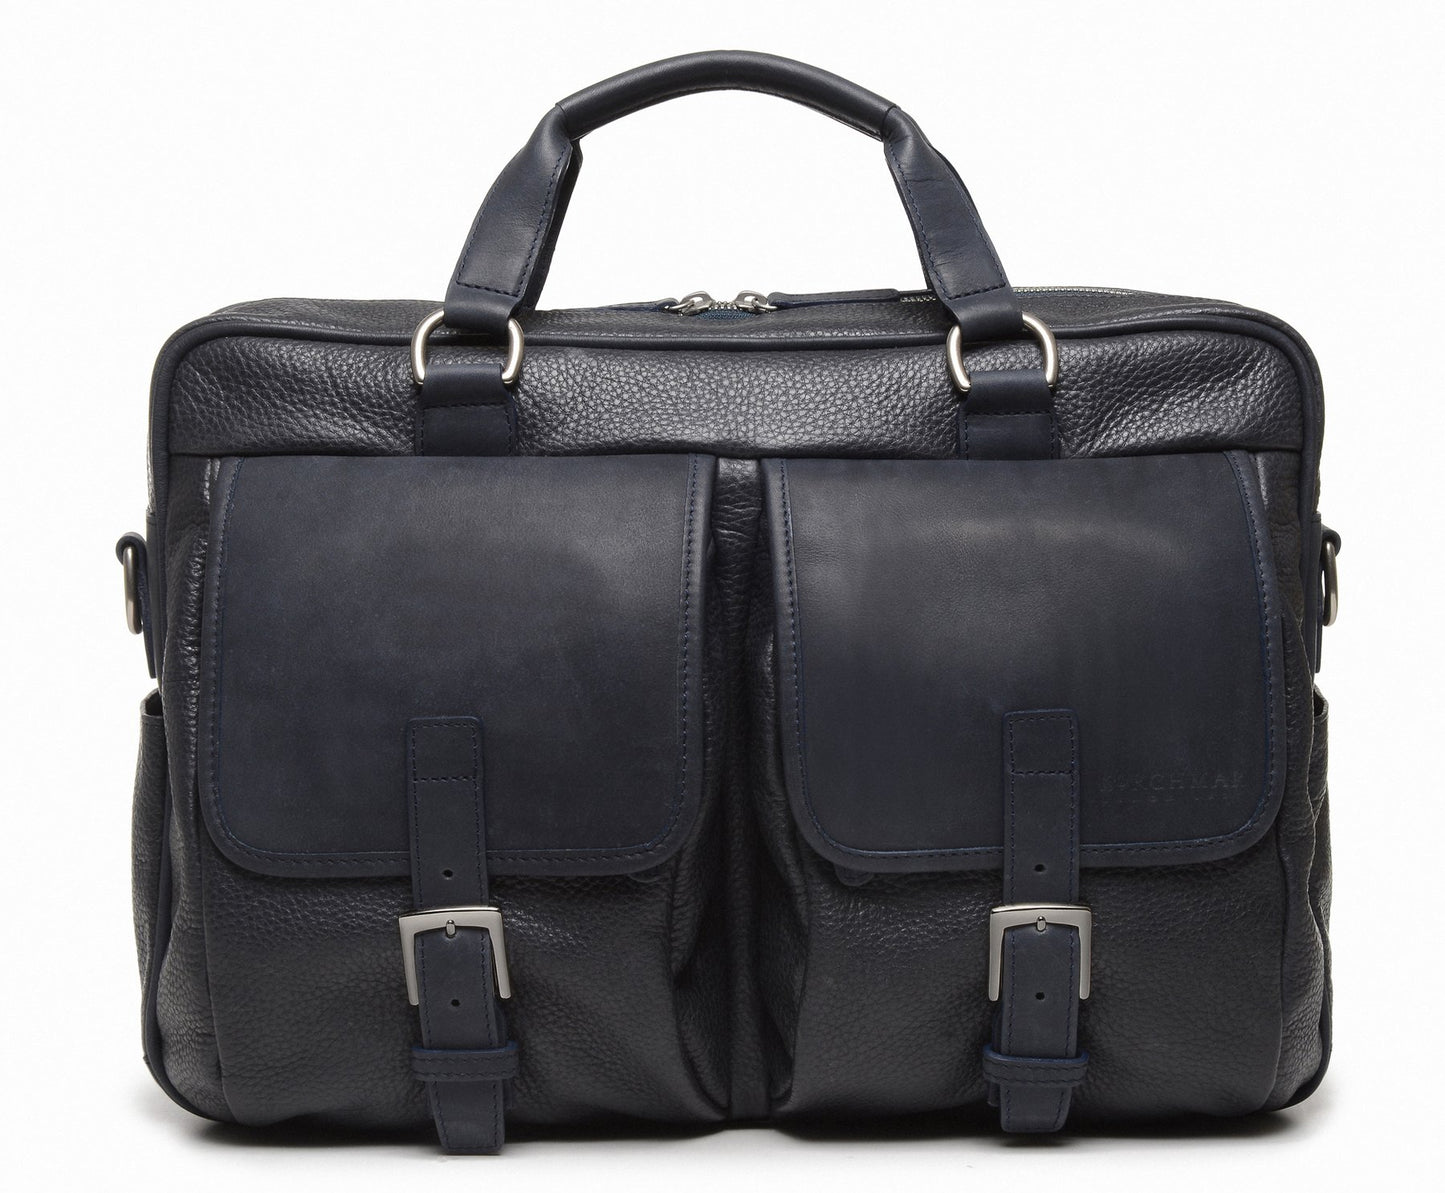 Barton Leather Brief Bag | Grain Leather | Made in USA | Korchmar | Black Leather with Nickel Fittings